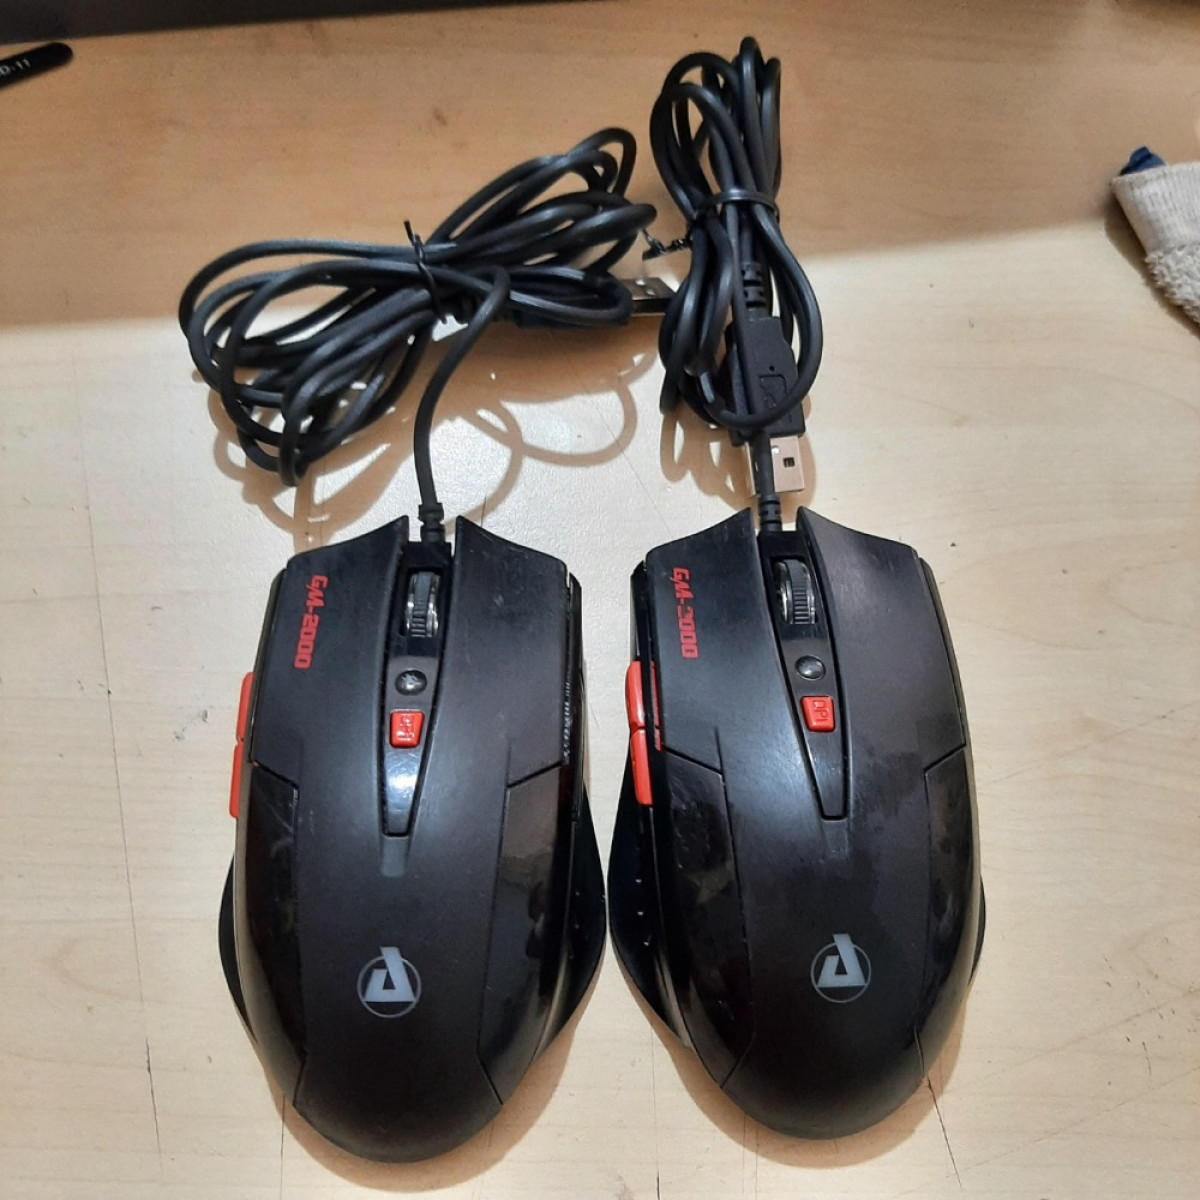 Azio Levetron GM2000 Black 6 Buttons 1 x Wheel USB Wired Optical 2000 dpi Gaming Mouse